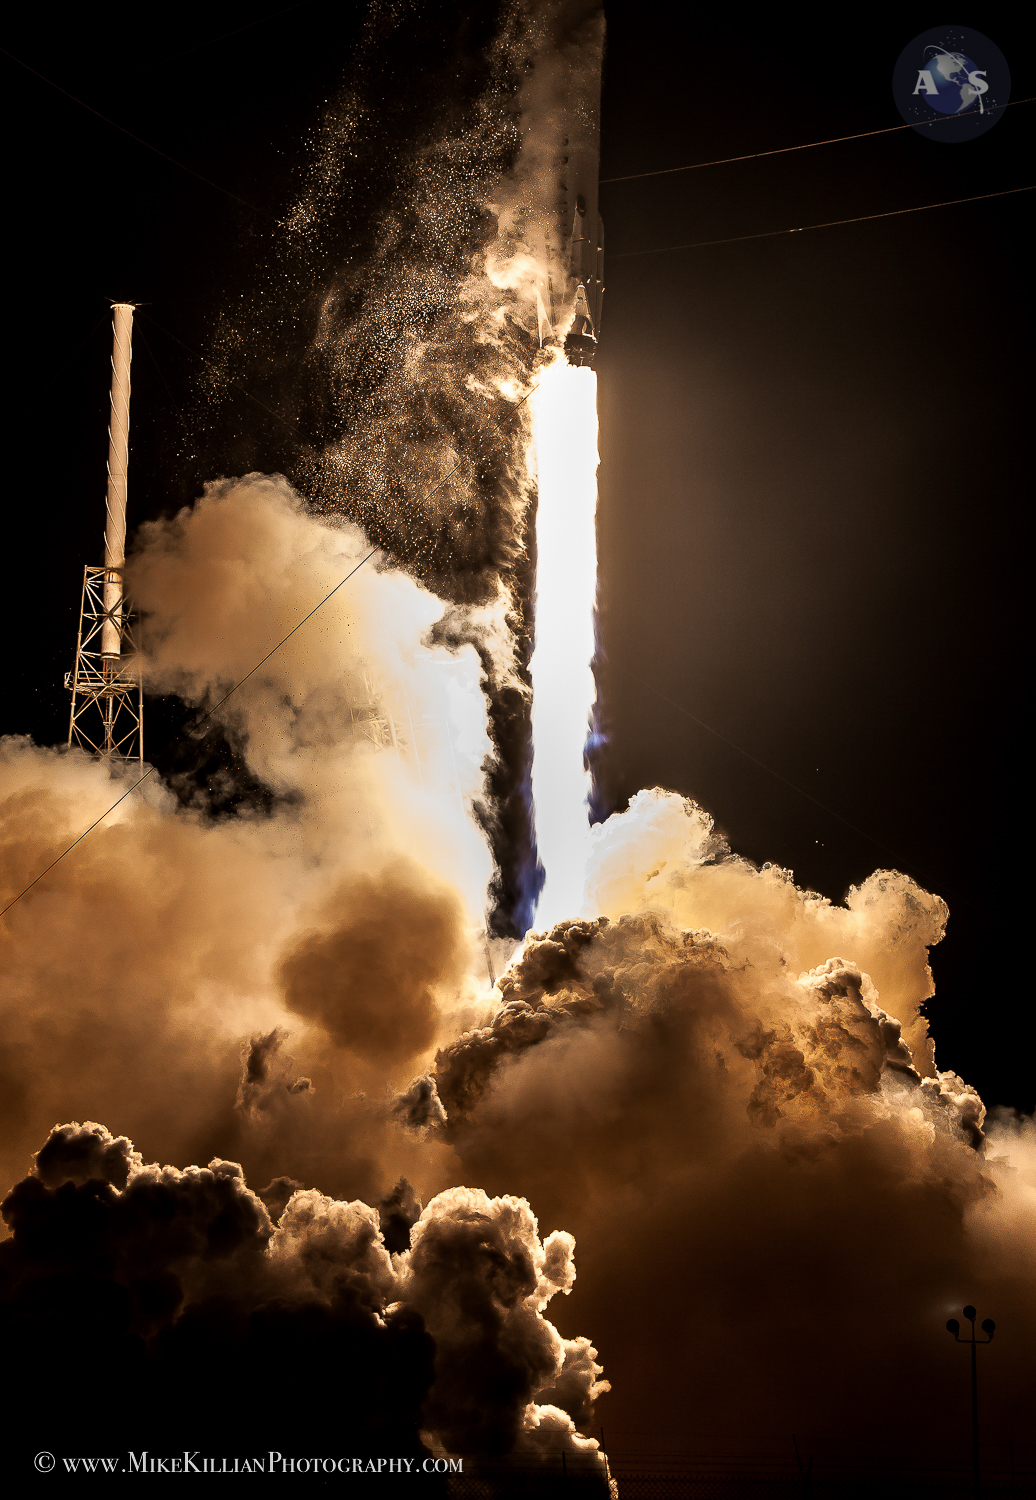 Through the Lens: SpaceX’s Fifth Dragon Resupply Launch to ISS in Stunning Imagery ...